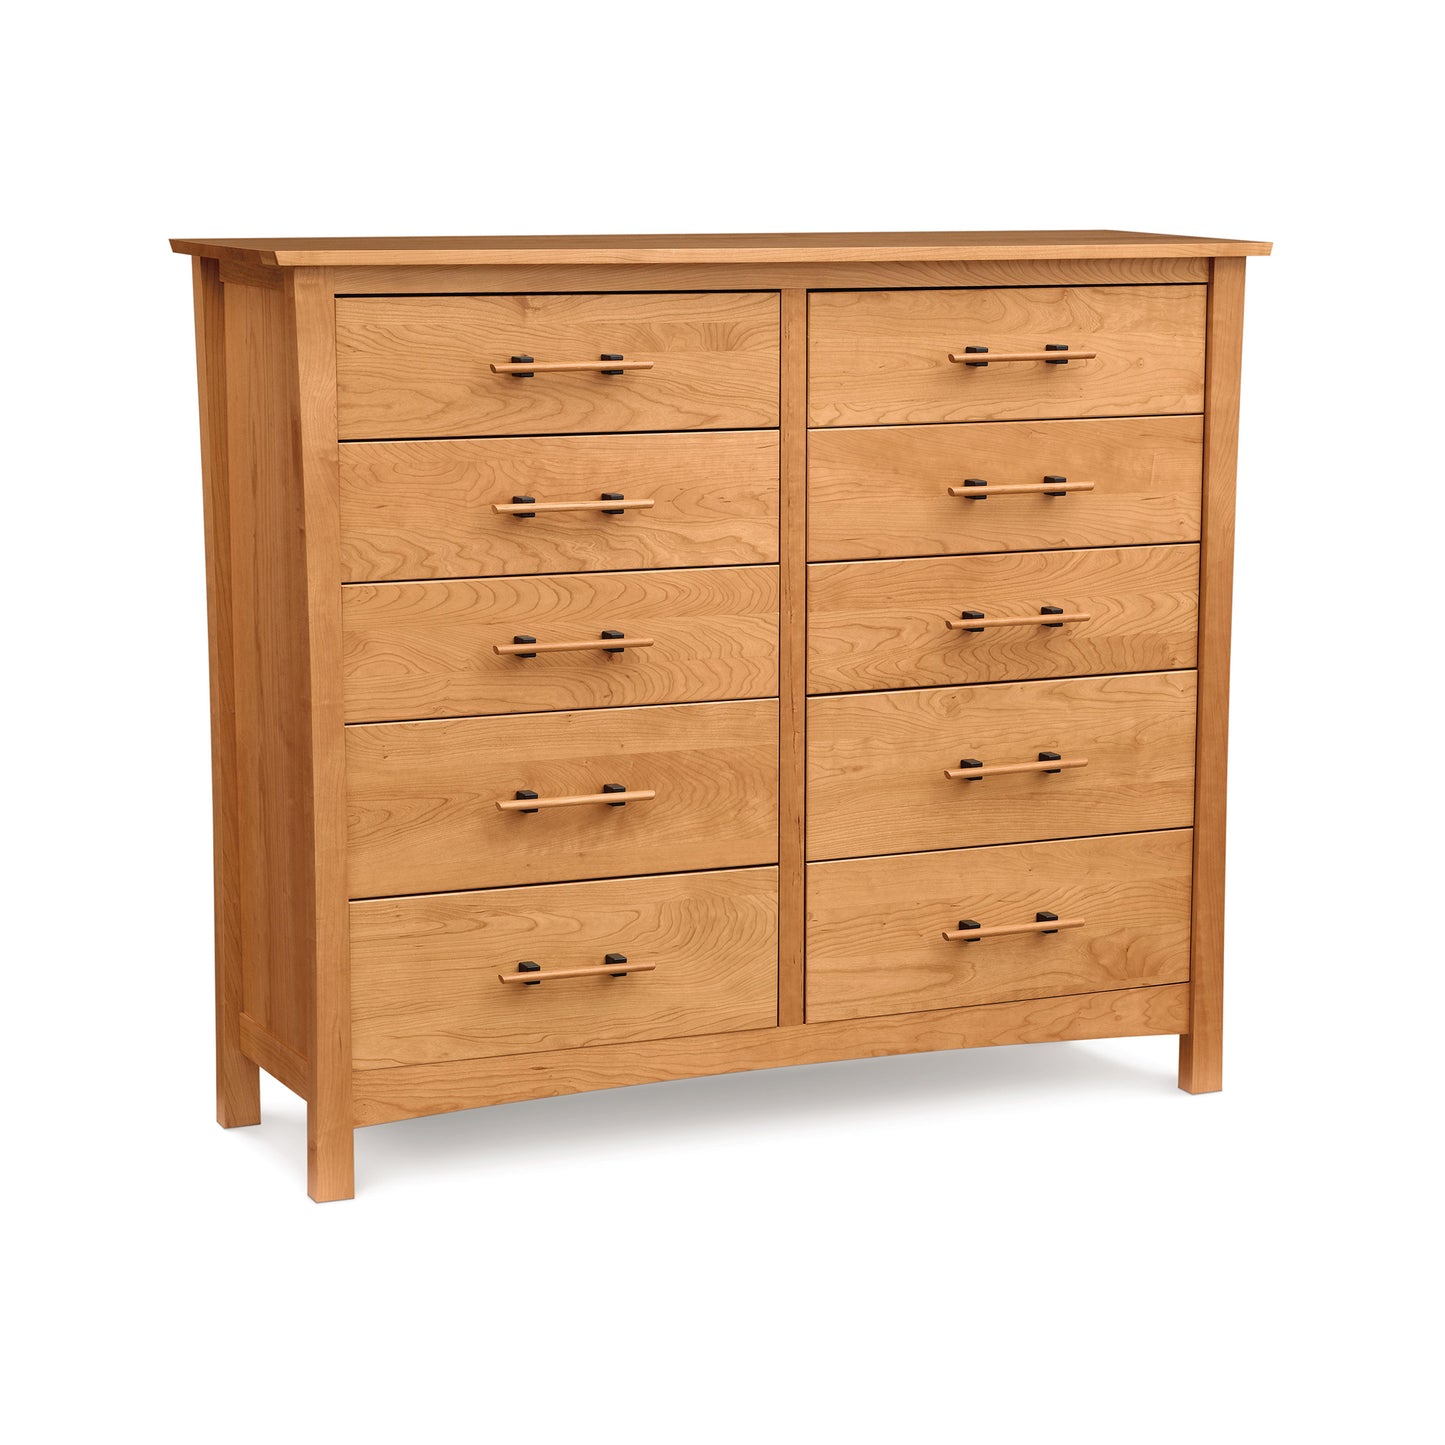 A Copeland Furniture Monterey 10-Drawer Dresser made of cherry wood, featuring metal handles and a simple, sturdy design.